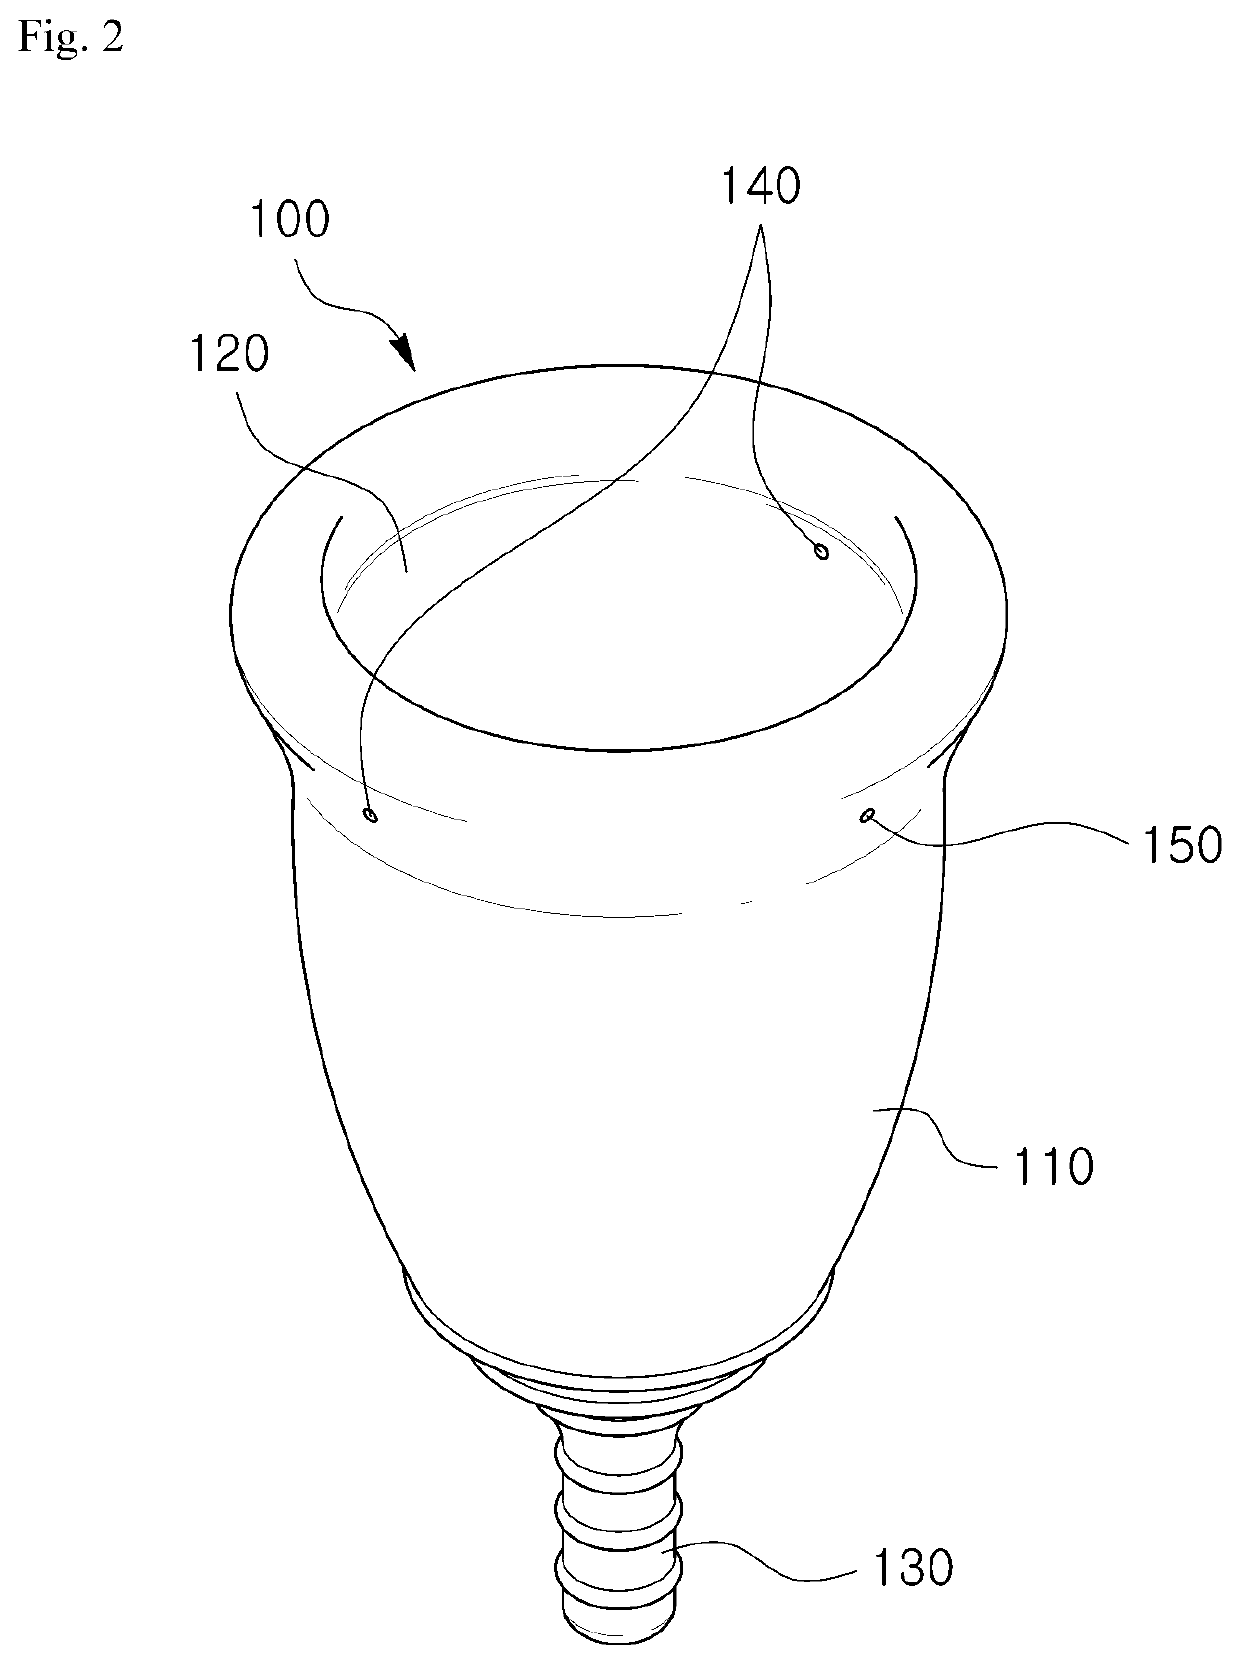 Menstrual cup capable of being easily removed